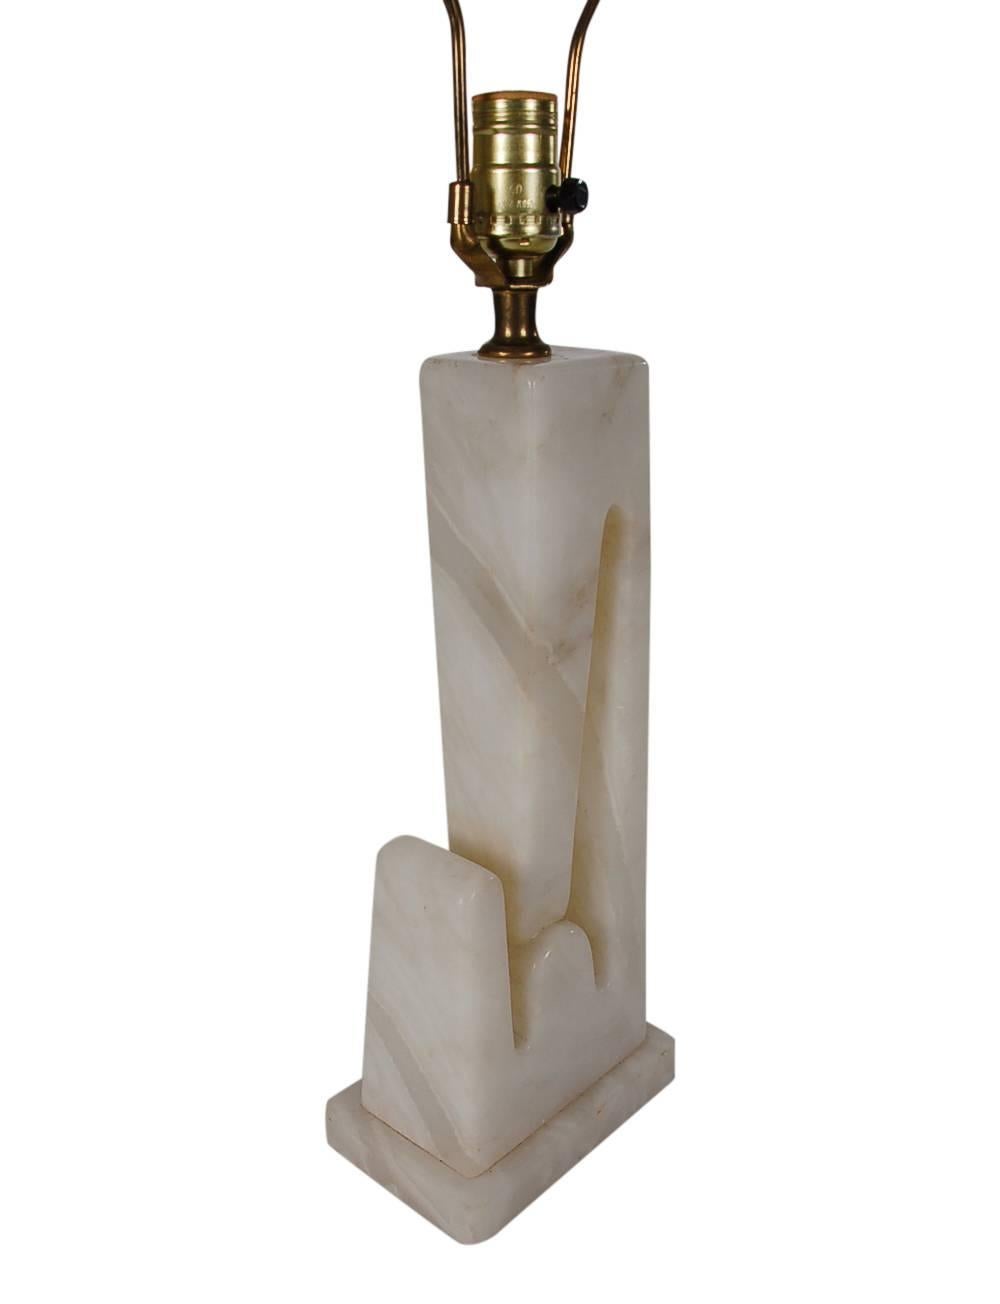 A sculptural marble table lamp produced in Italy in the 1960s. It features a heavy solid alabaster base in an art deco form. Tested and fully working.